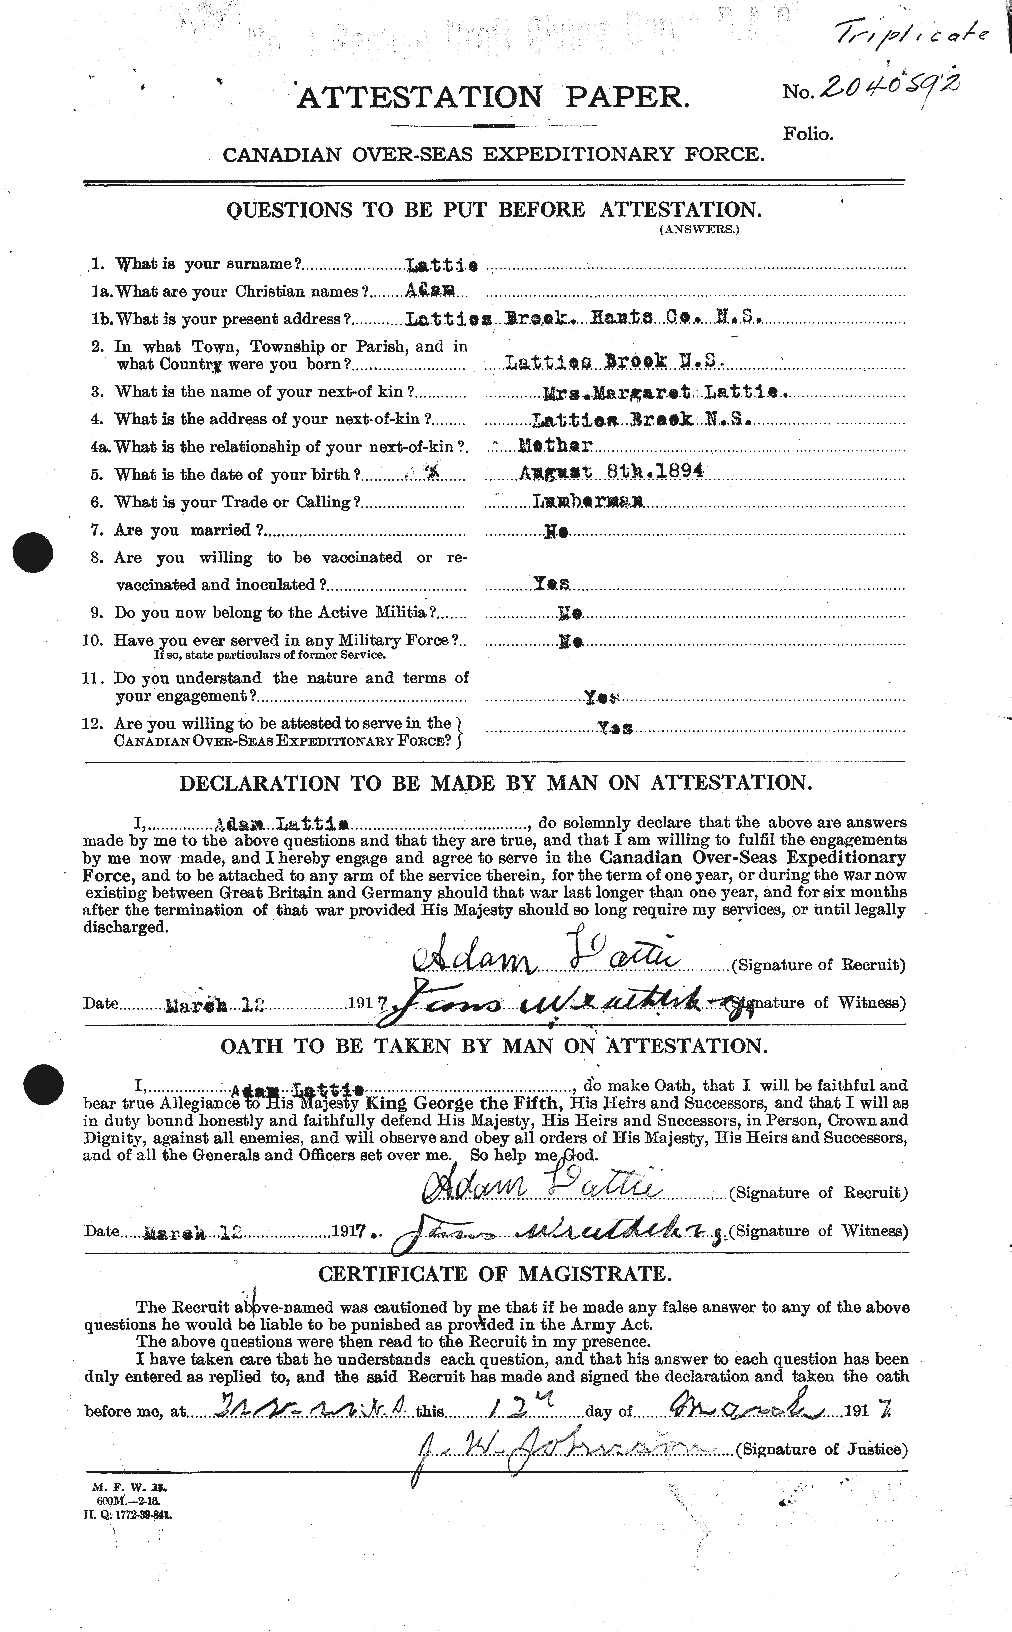 Personnel Records of the First World War - CEF 455354a